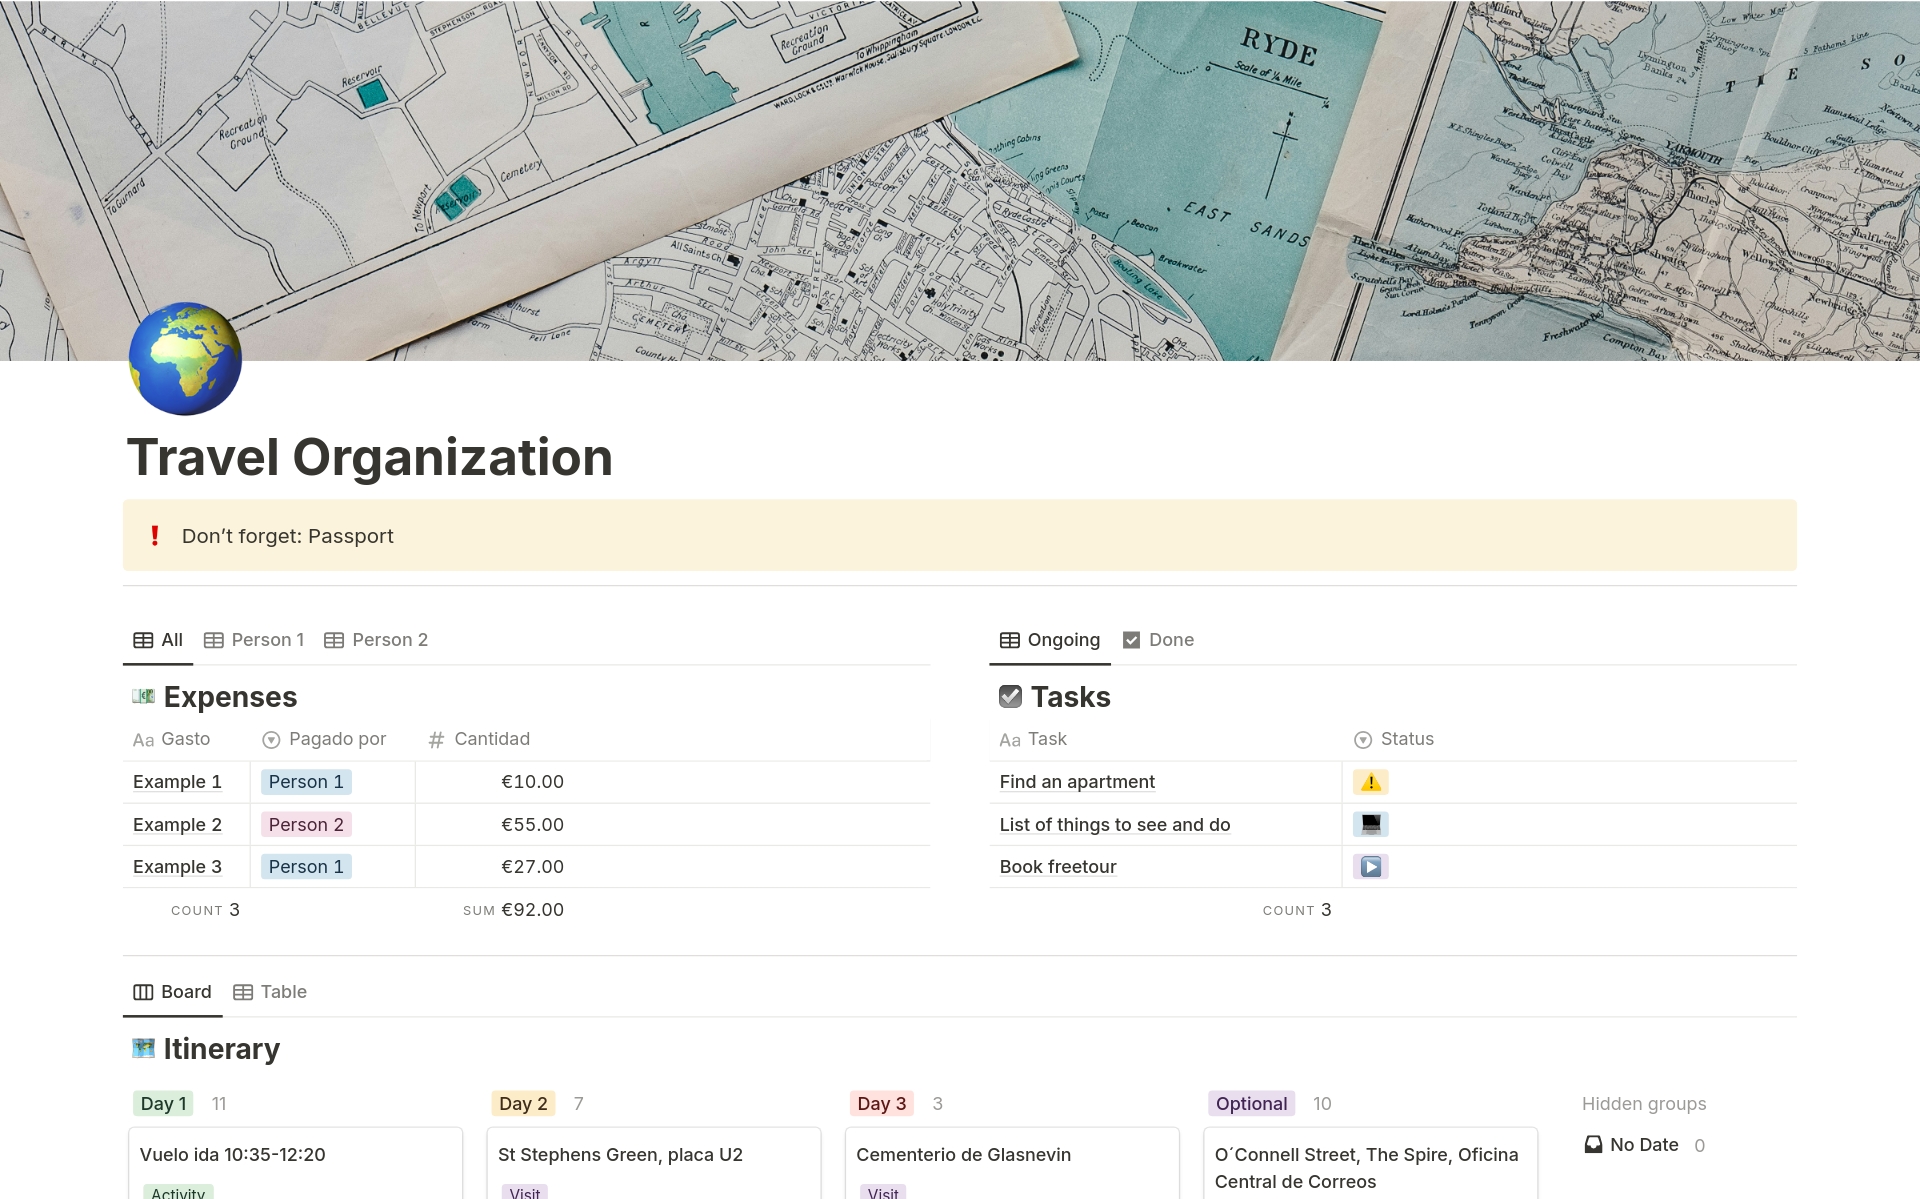 Make your trips unforgettable with our organizational template for Notion! Designed to simplify the planning of your adventures, this template gives you an efficient way to manage all aspects of your trip, from expenses to tasks to your daily itinerary.